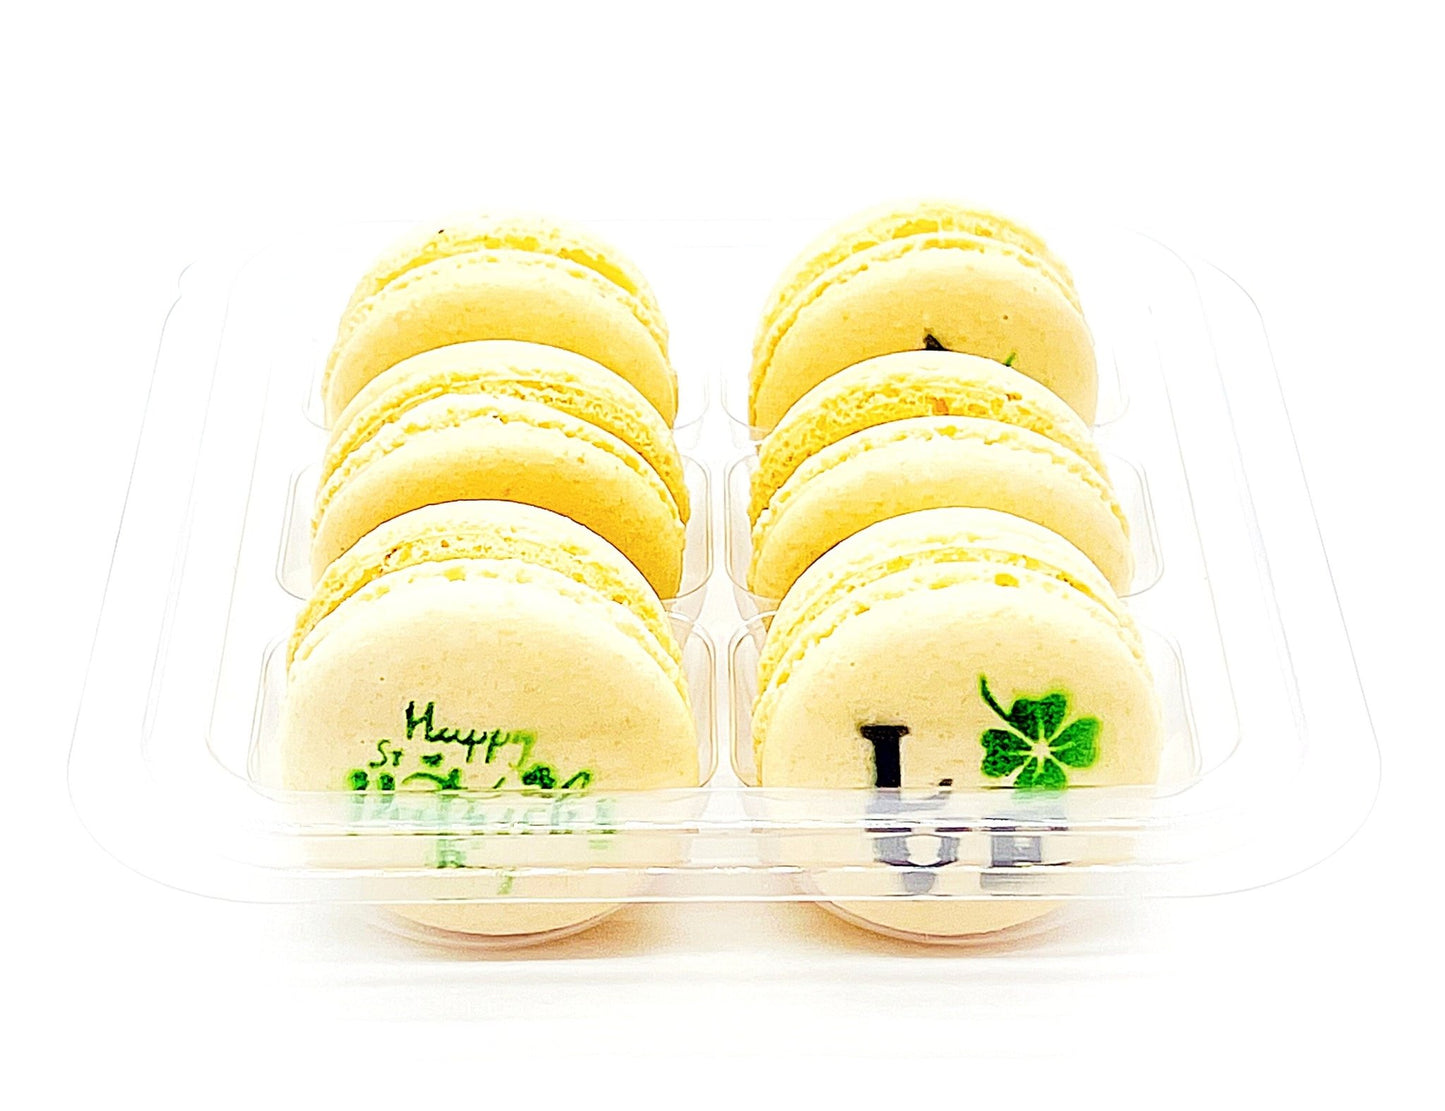 St. Patrick's Day French Macaron Set #3 | 6 Pack | Perfect for upcoming St. Patrick's Day Celebration - Macaron Centrale